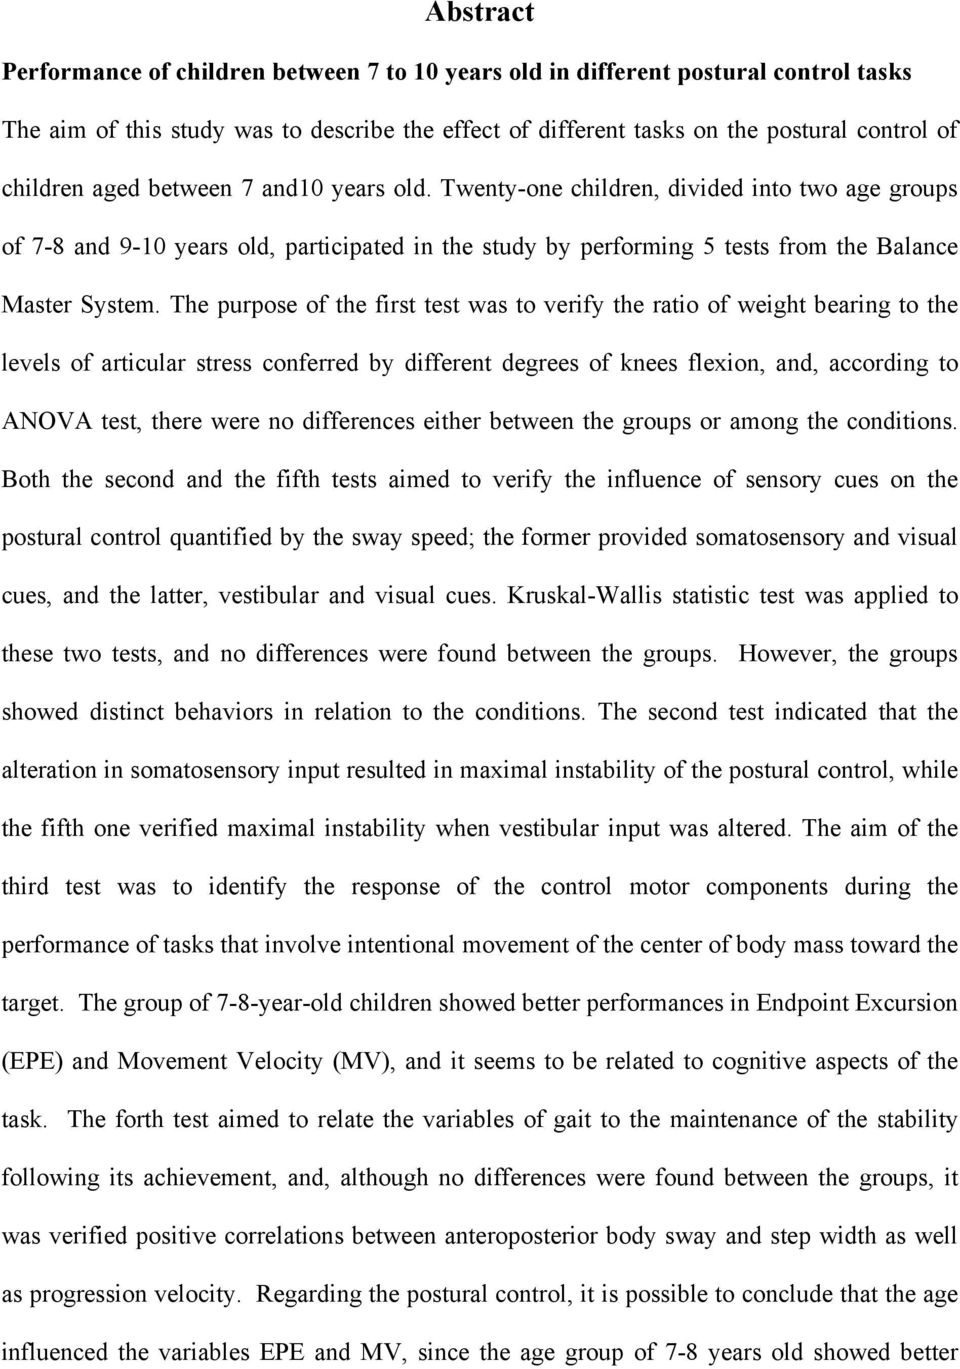 The purpose of the first test was to verify the ratio of weight bearing to the levels of articular stress conferred by different degrees of knees flexion, and, according to ANOVA test, there were no